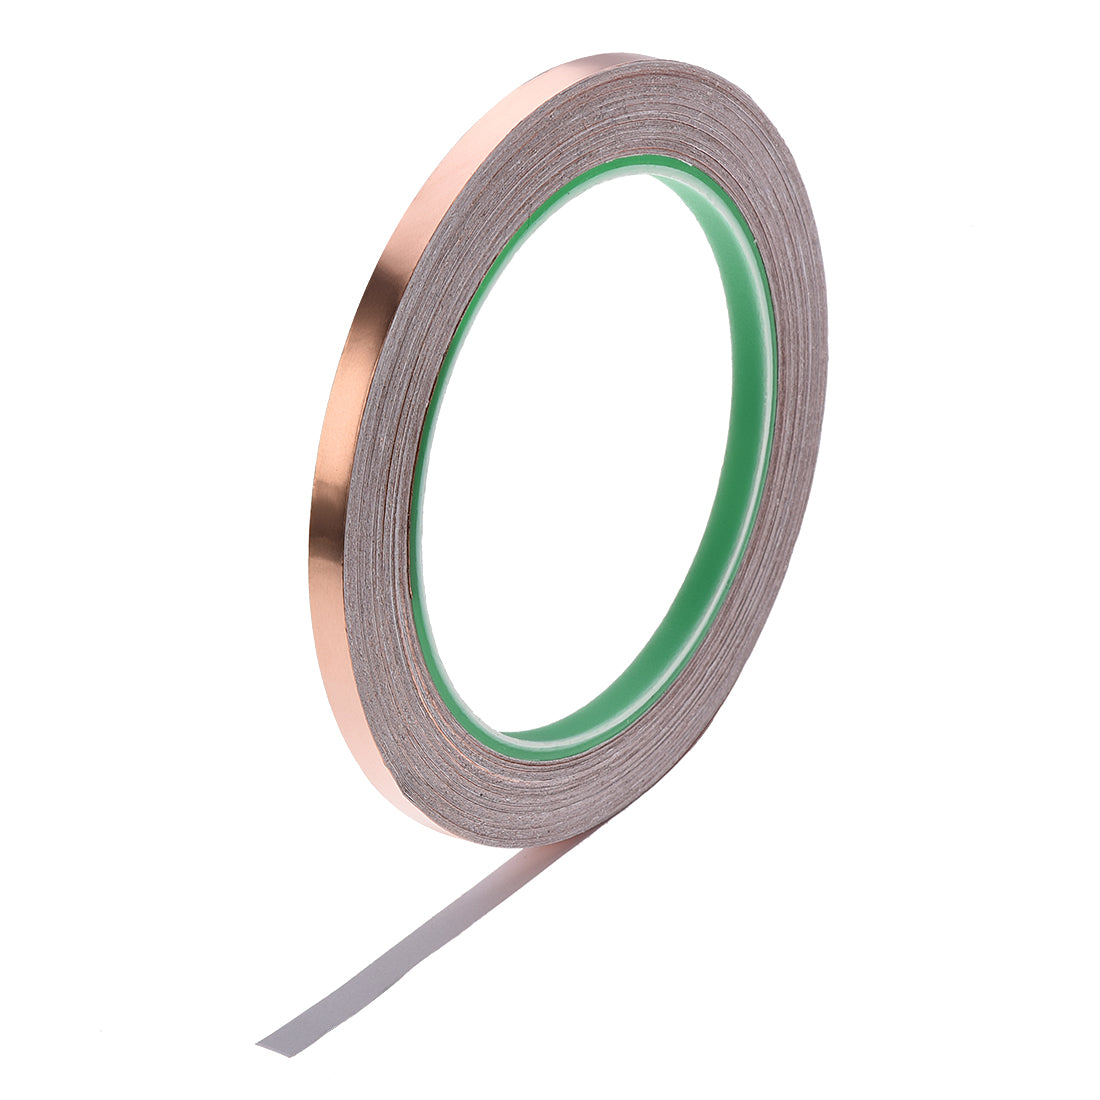 uxcell Uxcell Double Sided Conductive Tape Copper Foil Tape 6mm x 20m/65.6ft for EMI Shielding